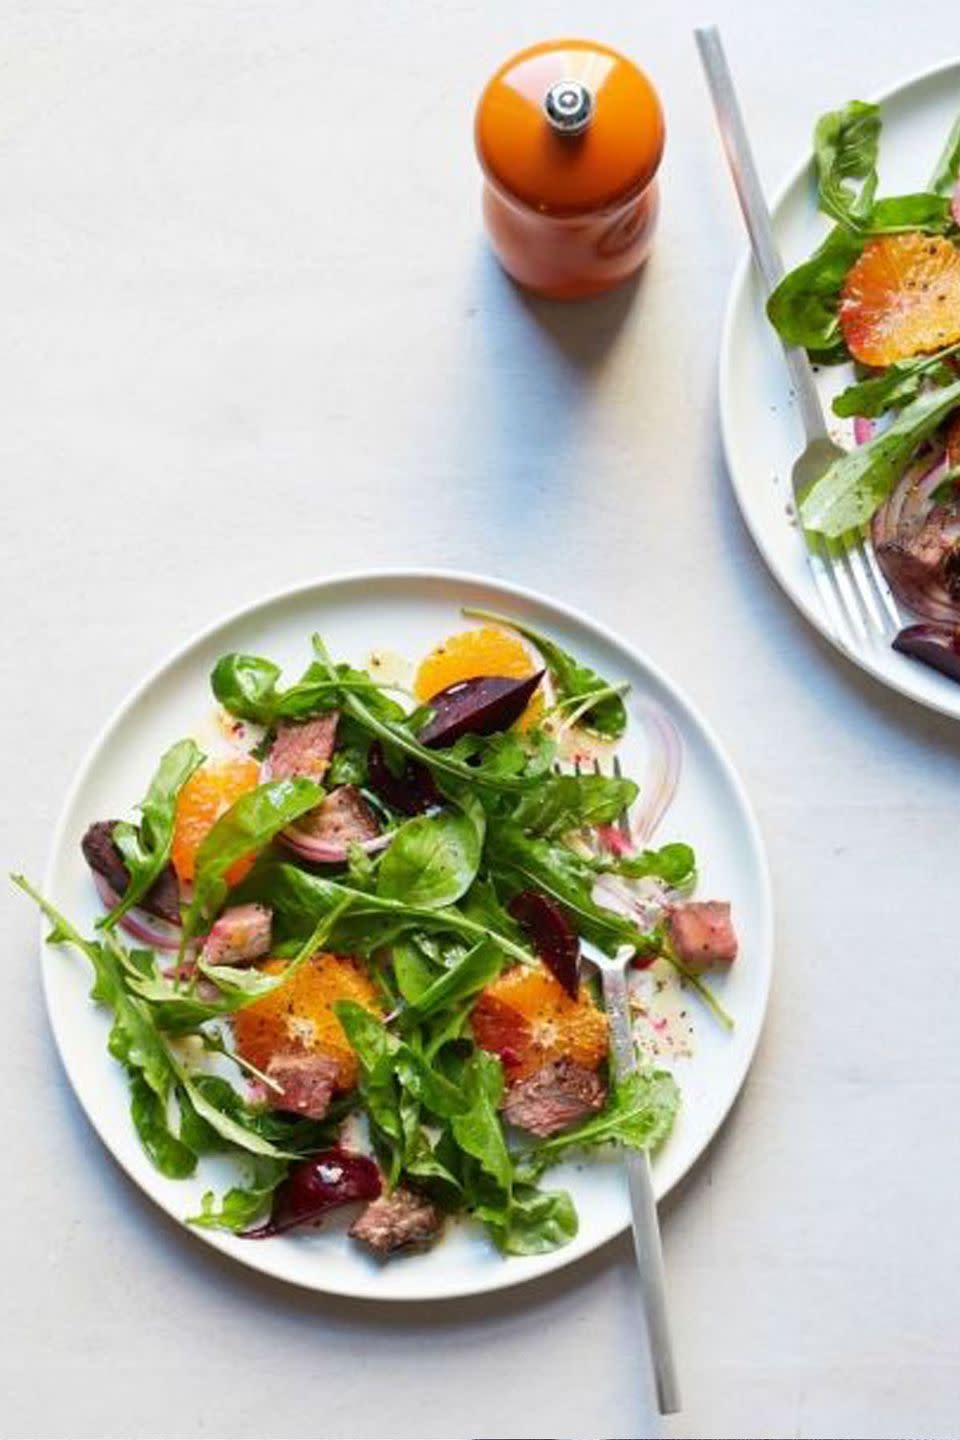 <p>You don't have to cut red meat from your diet: Portions and leaner cuts are key. Pairing steak with oranges and beets helps keep this salad light and refreshing, yet totally satisfying.</p><p><a href="https://www.womansday.com/food-recipes/food-drinks/recipes/a53273/beet-tangerine-and-steak-salad/" rel="nofollow noopener" target="_blank" data-ylk="slk:Get the recipe for Beet, Tangerine and Steak Salad." class="link "><em>Get the recipe for Beet, Tangerine and Steak Salad.</em></a><br></p>